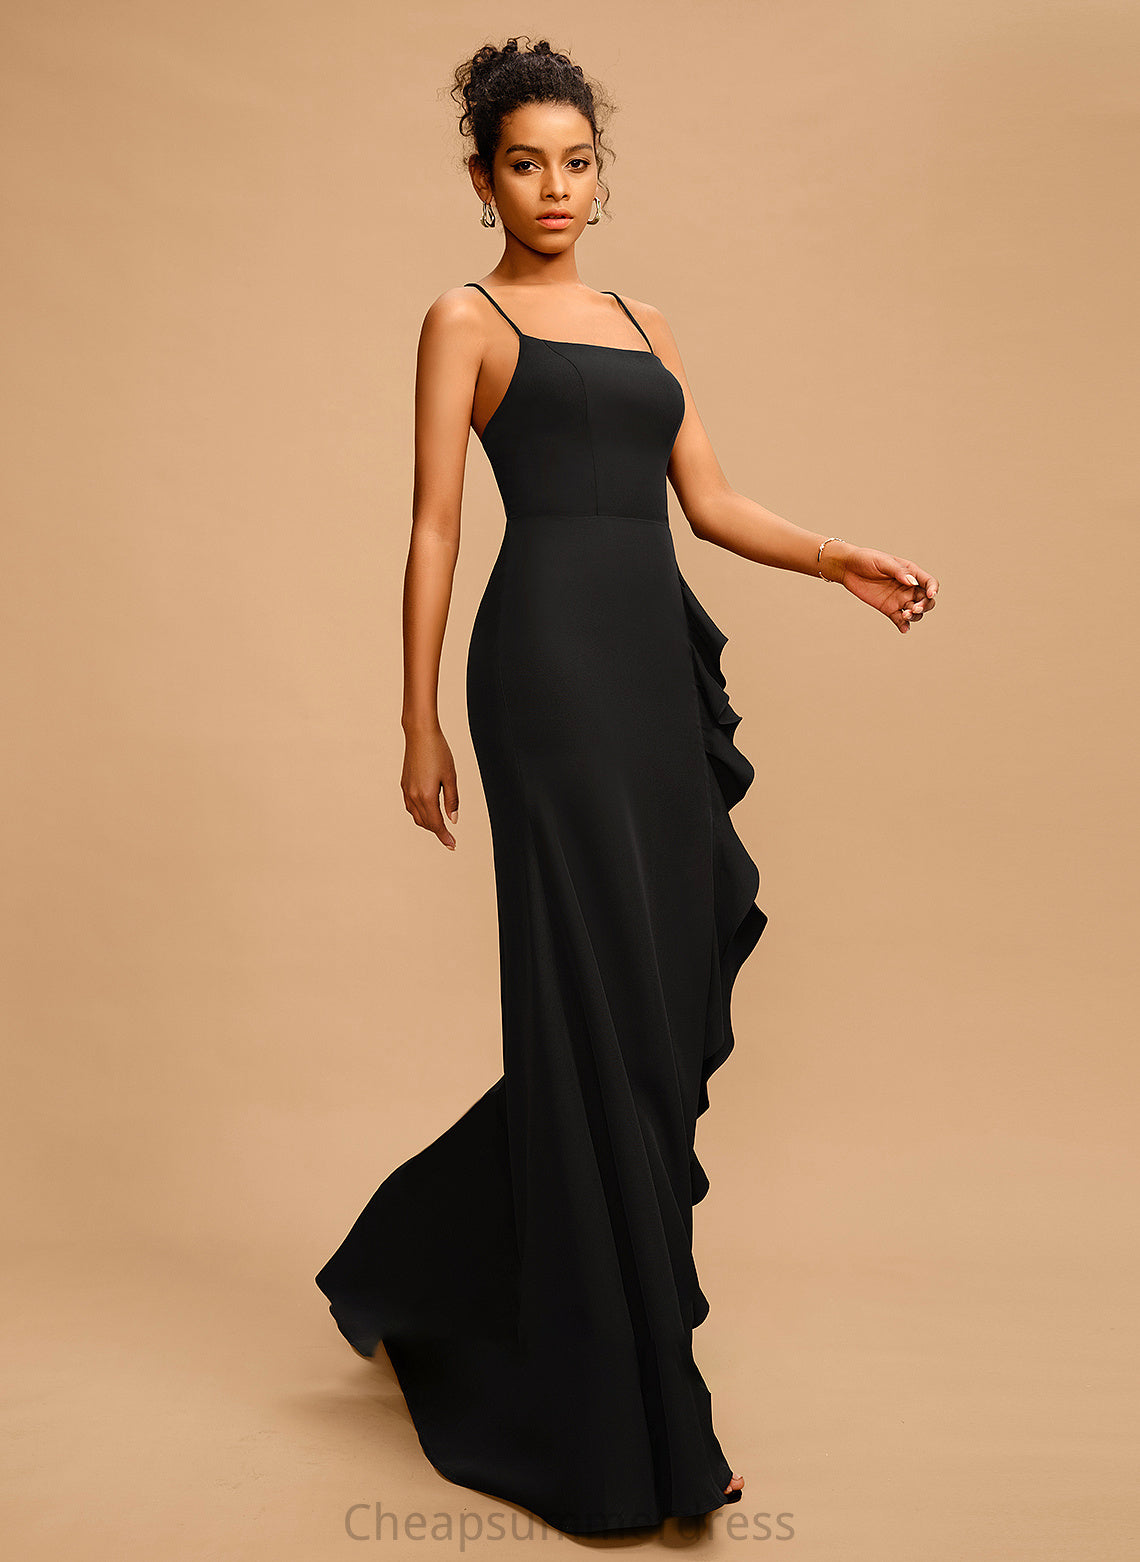 Prom Dresses Sheath/Column With Crepe Stretch Square Floor-Length Ruffle Neckline Meadow